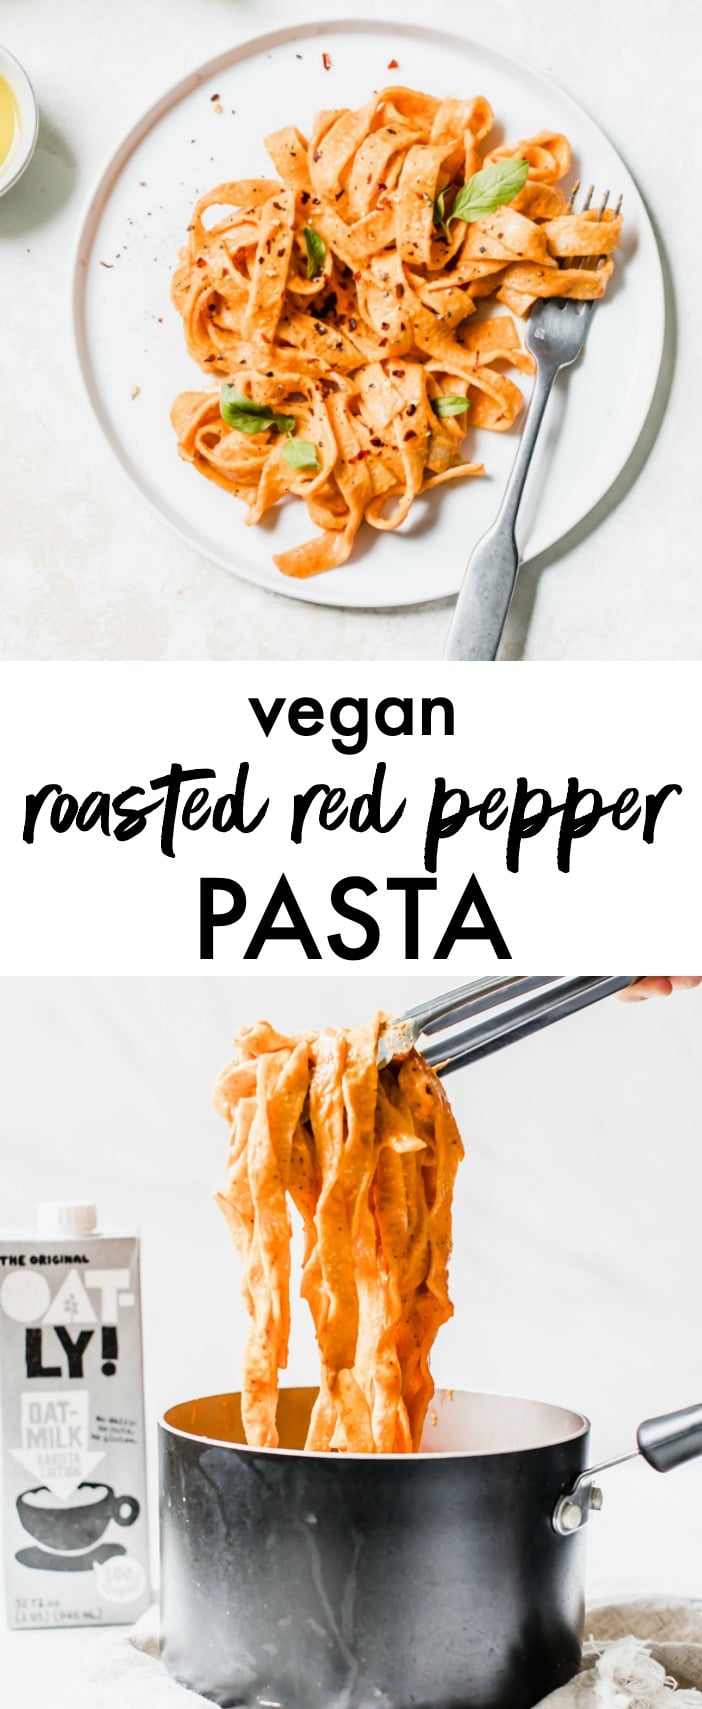 VEGAN roasted red pepper pasta made with cashews, roasted red peppers, oatmilk, and garlic #vegan #pasta